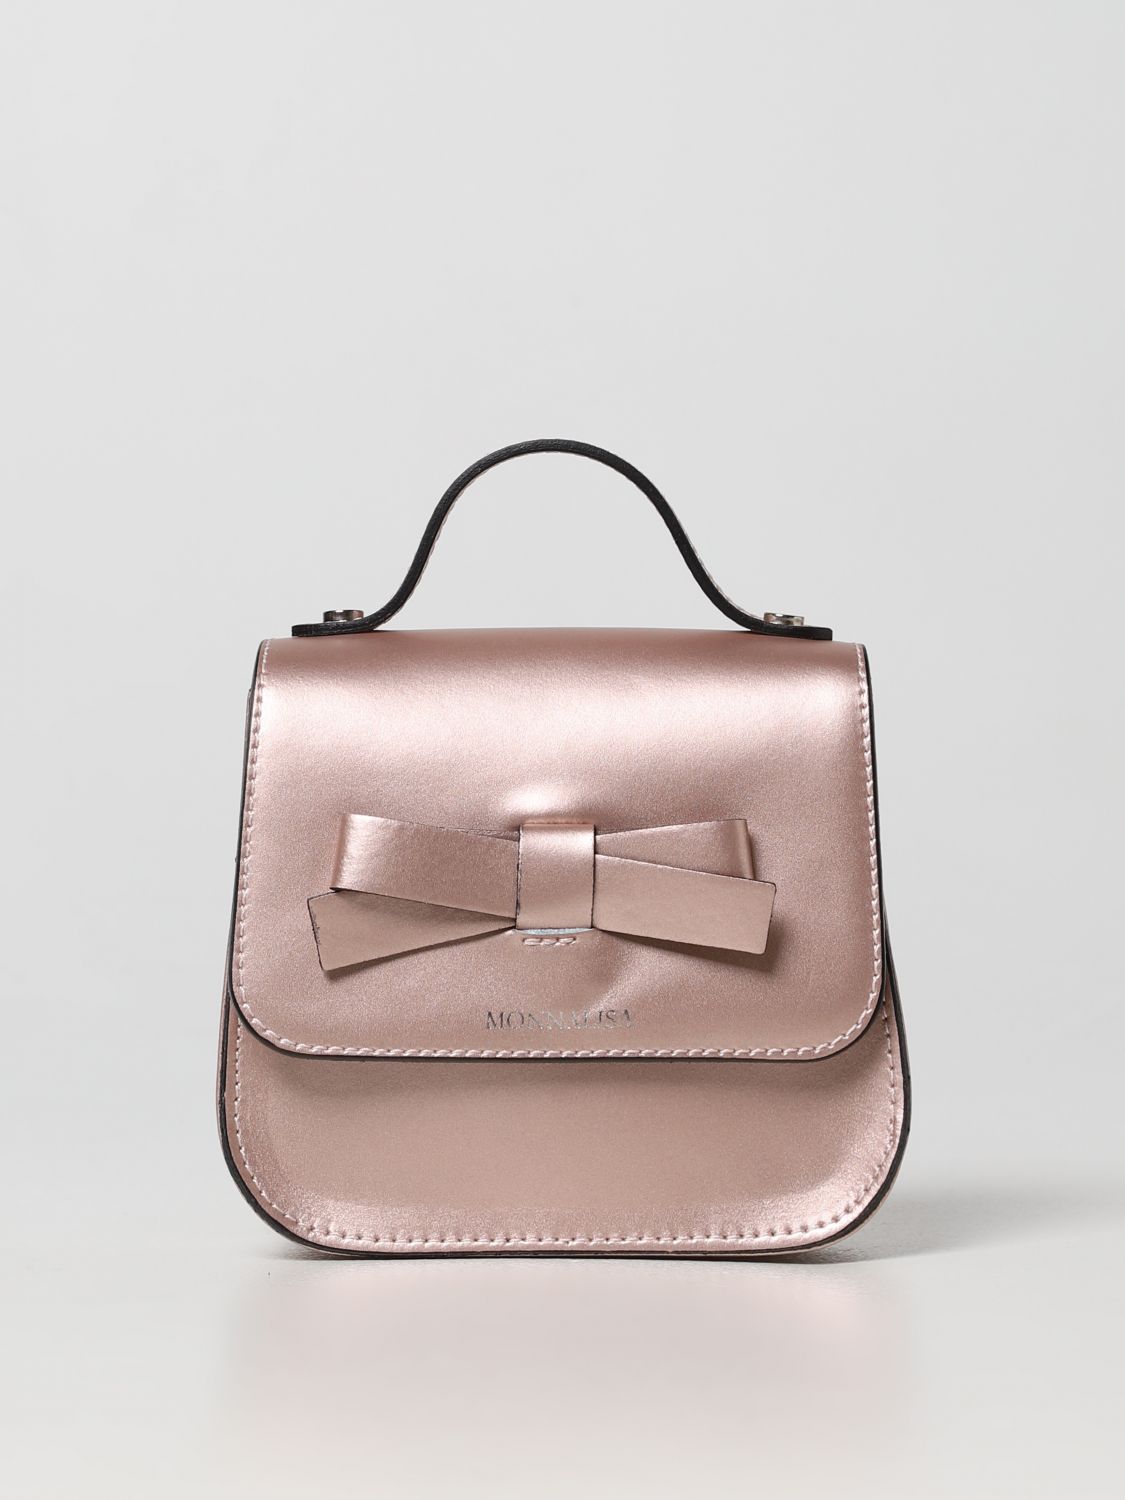 Monnalisa Bag In Laminated Leather In Copper Red